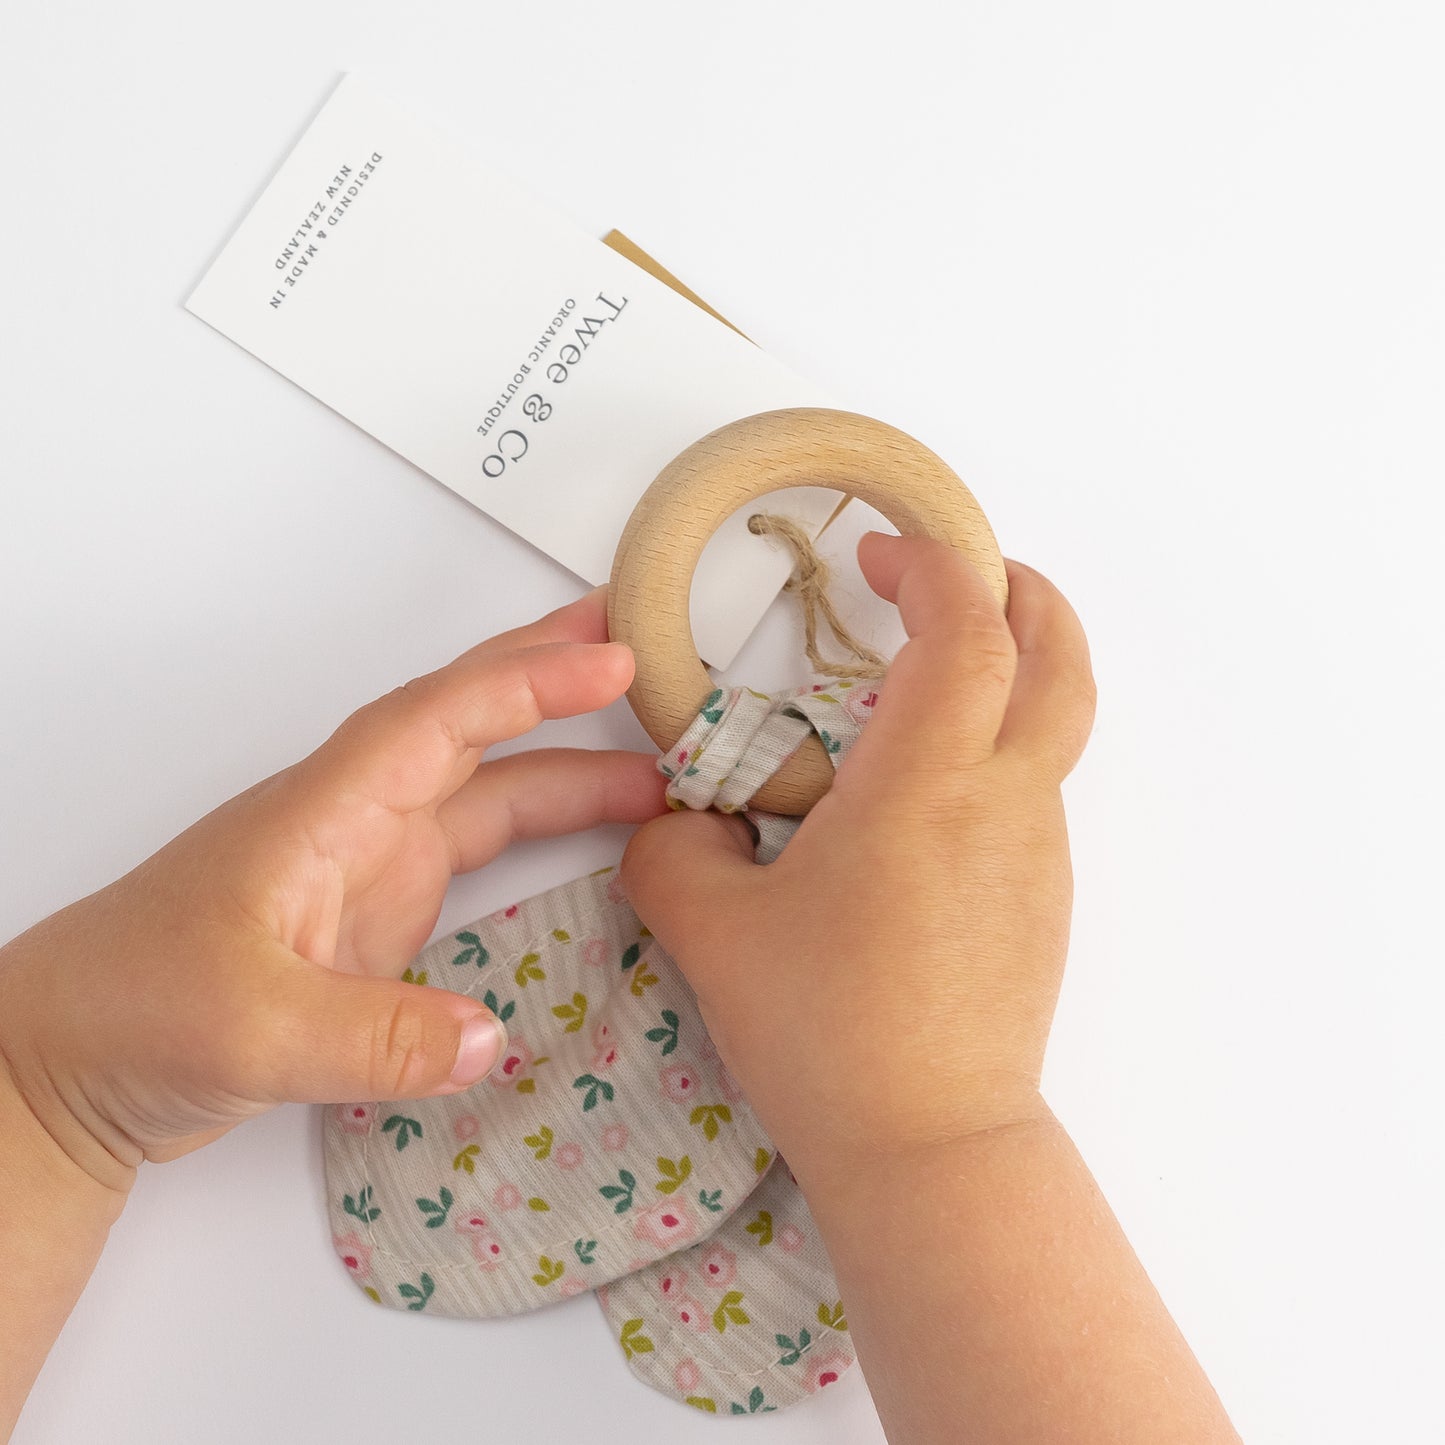 Baby Teether, Natural Beech Wood and Organic Cotton by Twee & Co